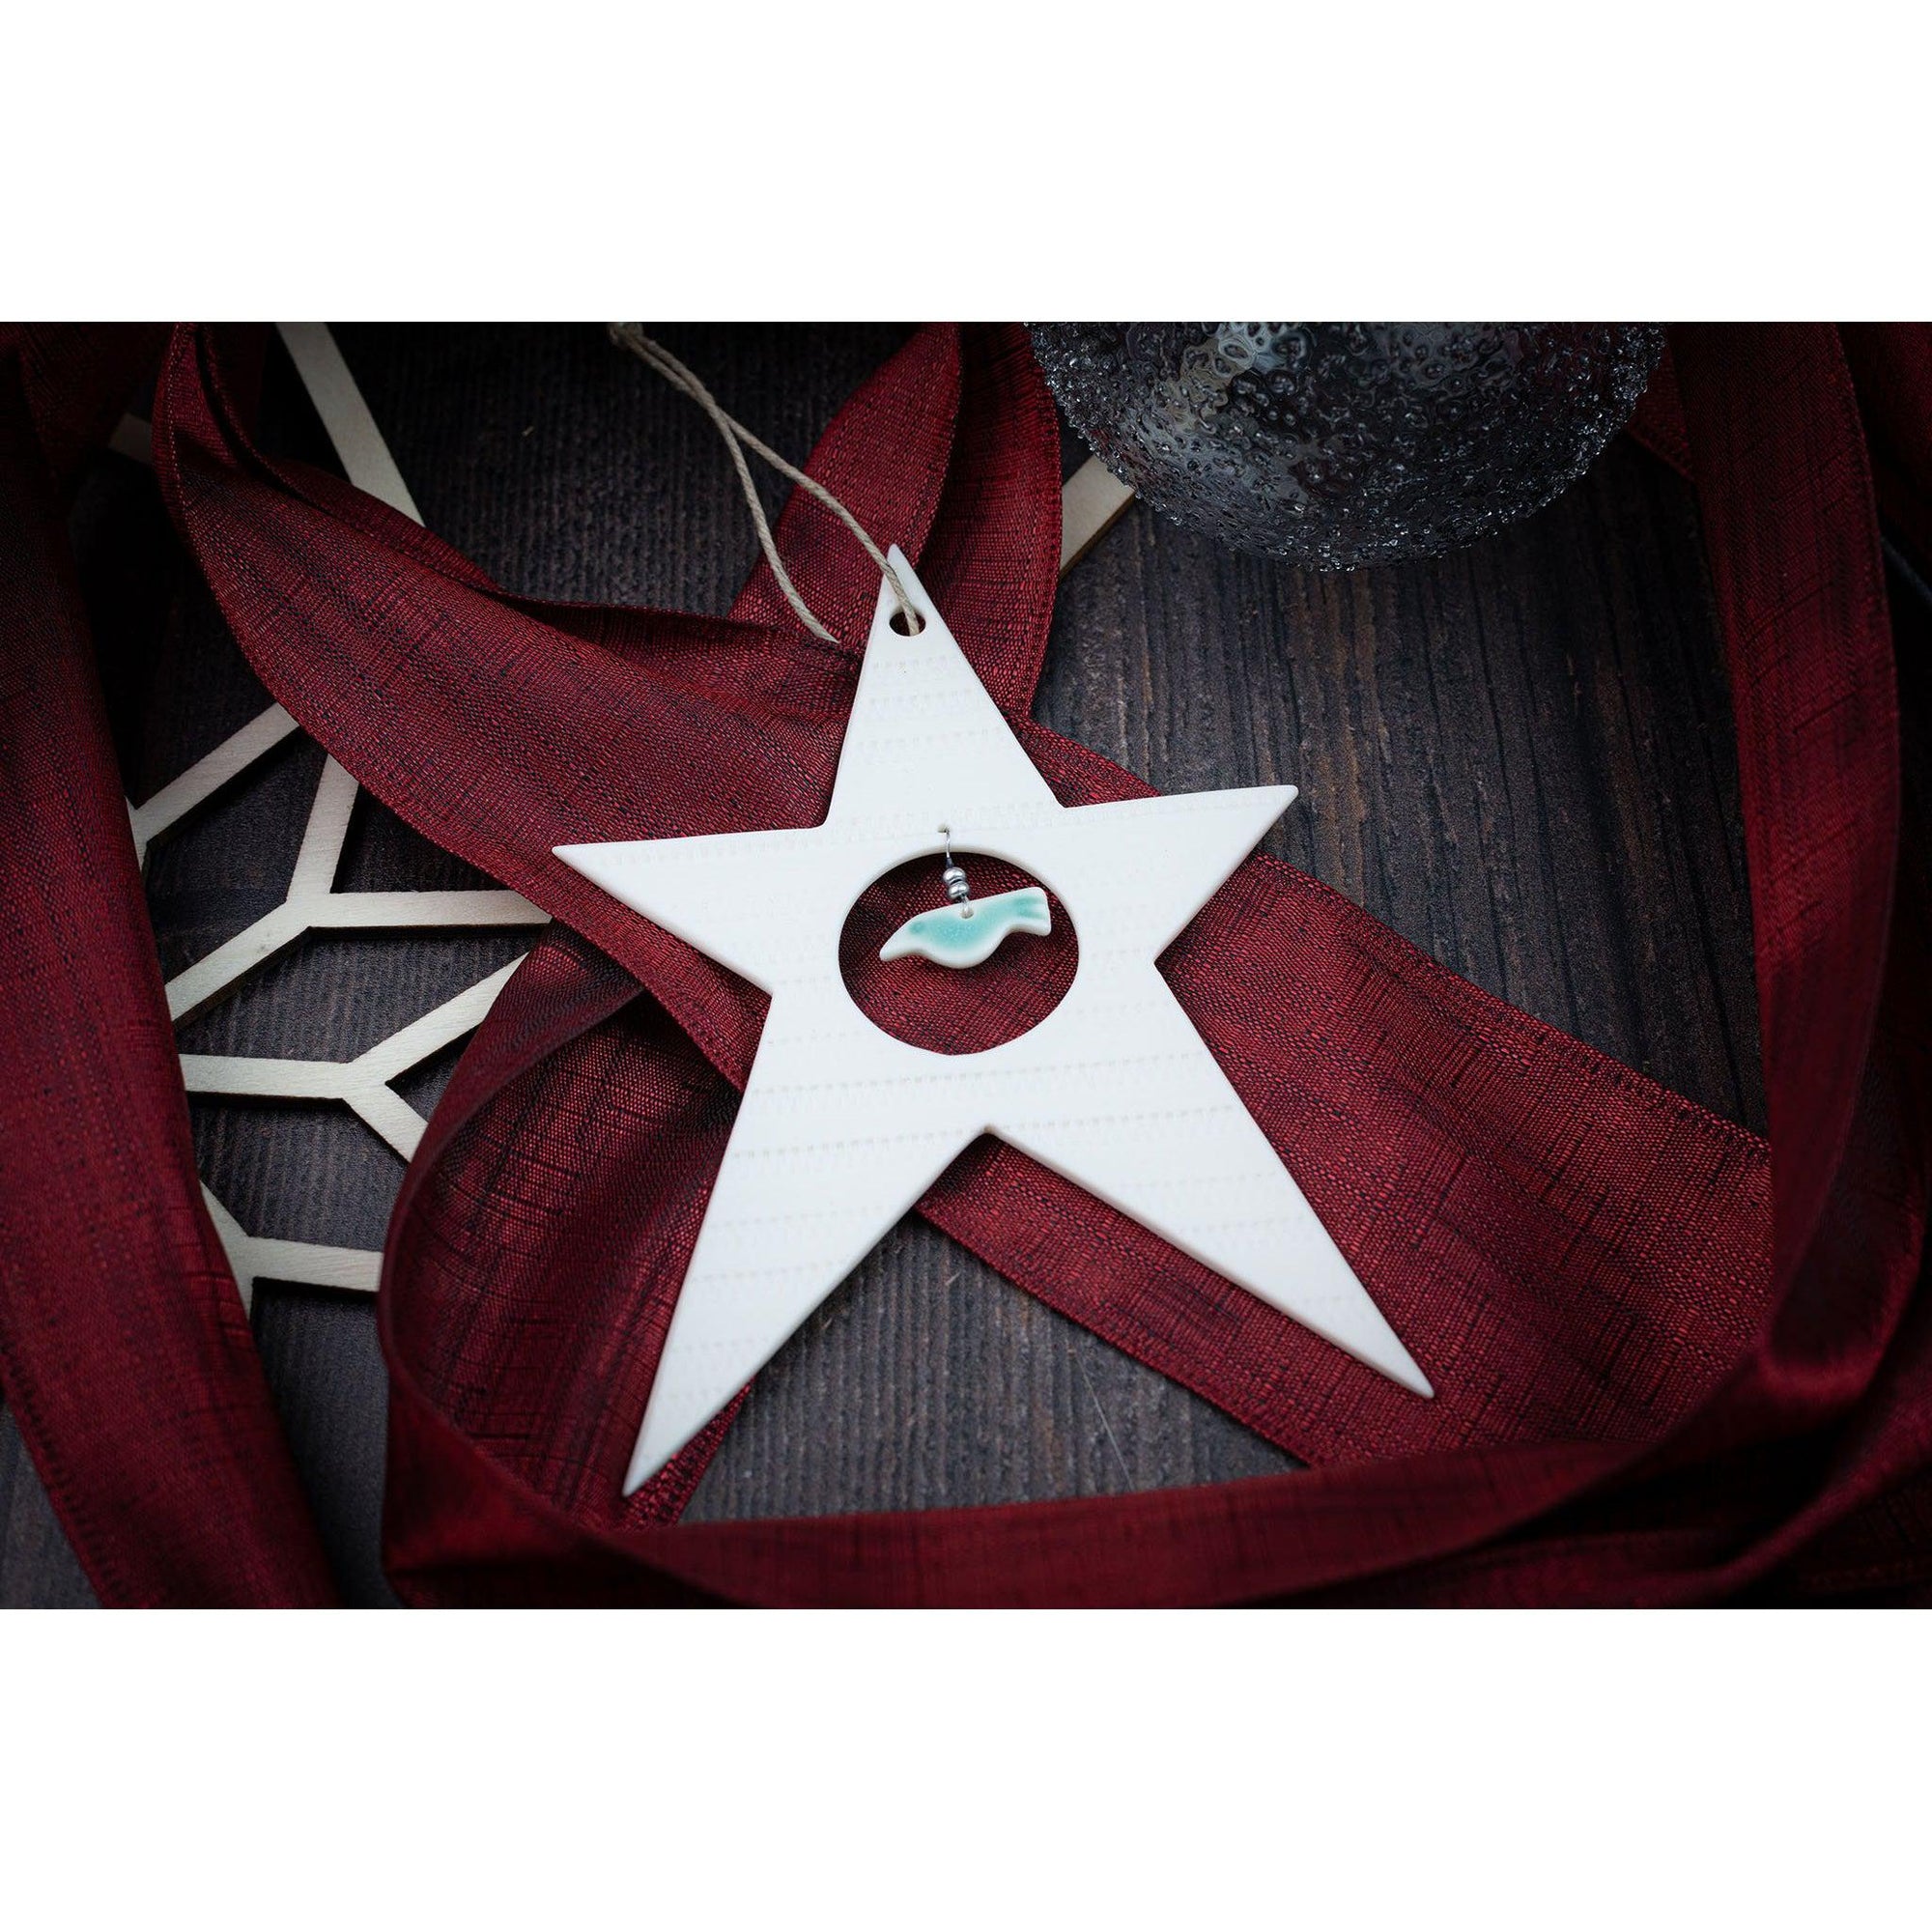 Porcelain Star Decoration by Rhian Winslade, available at Padstow Gallery, Cornwall